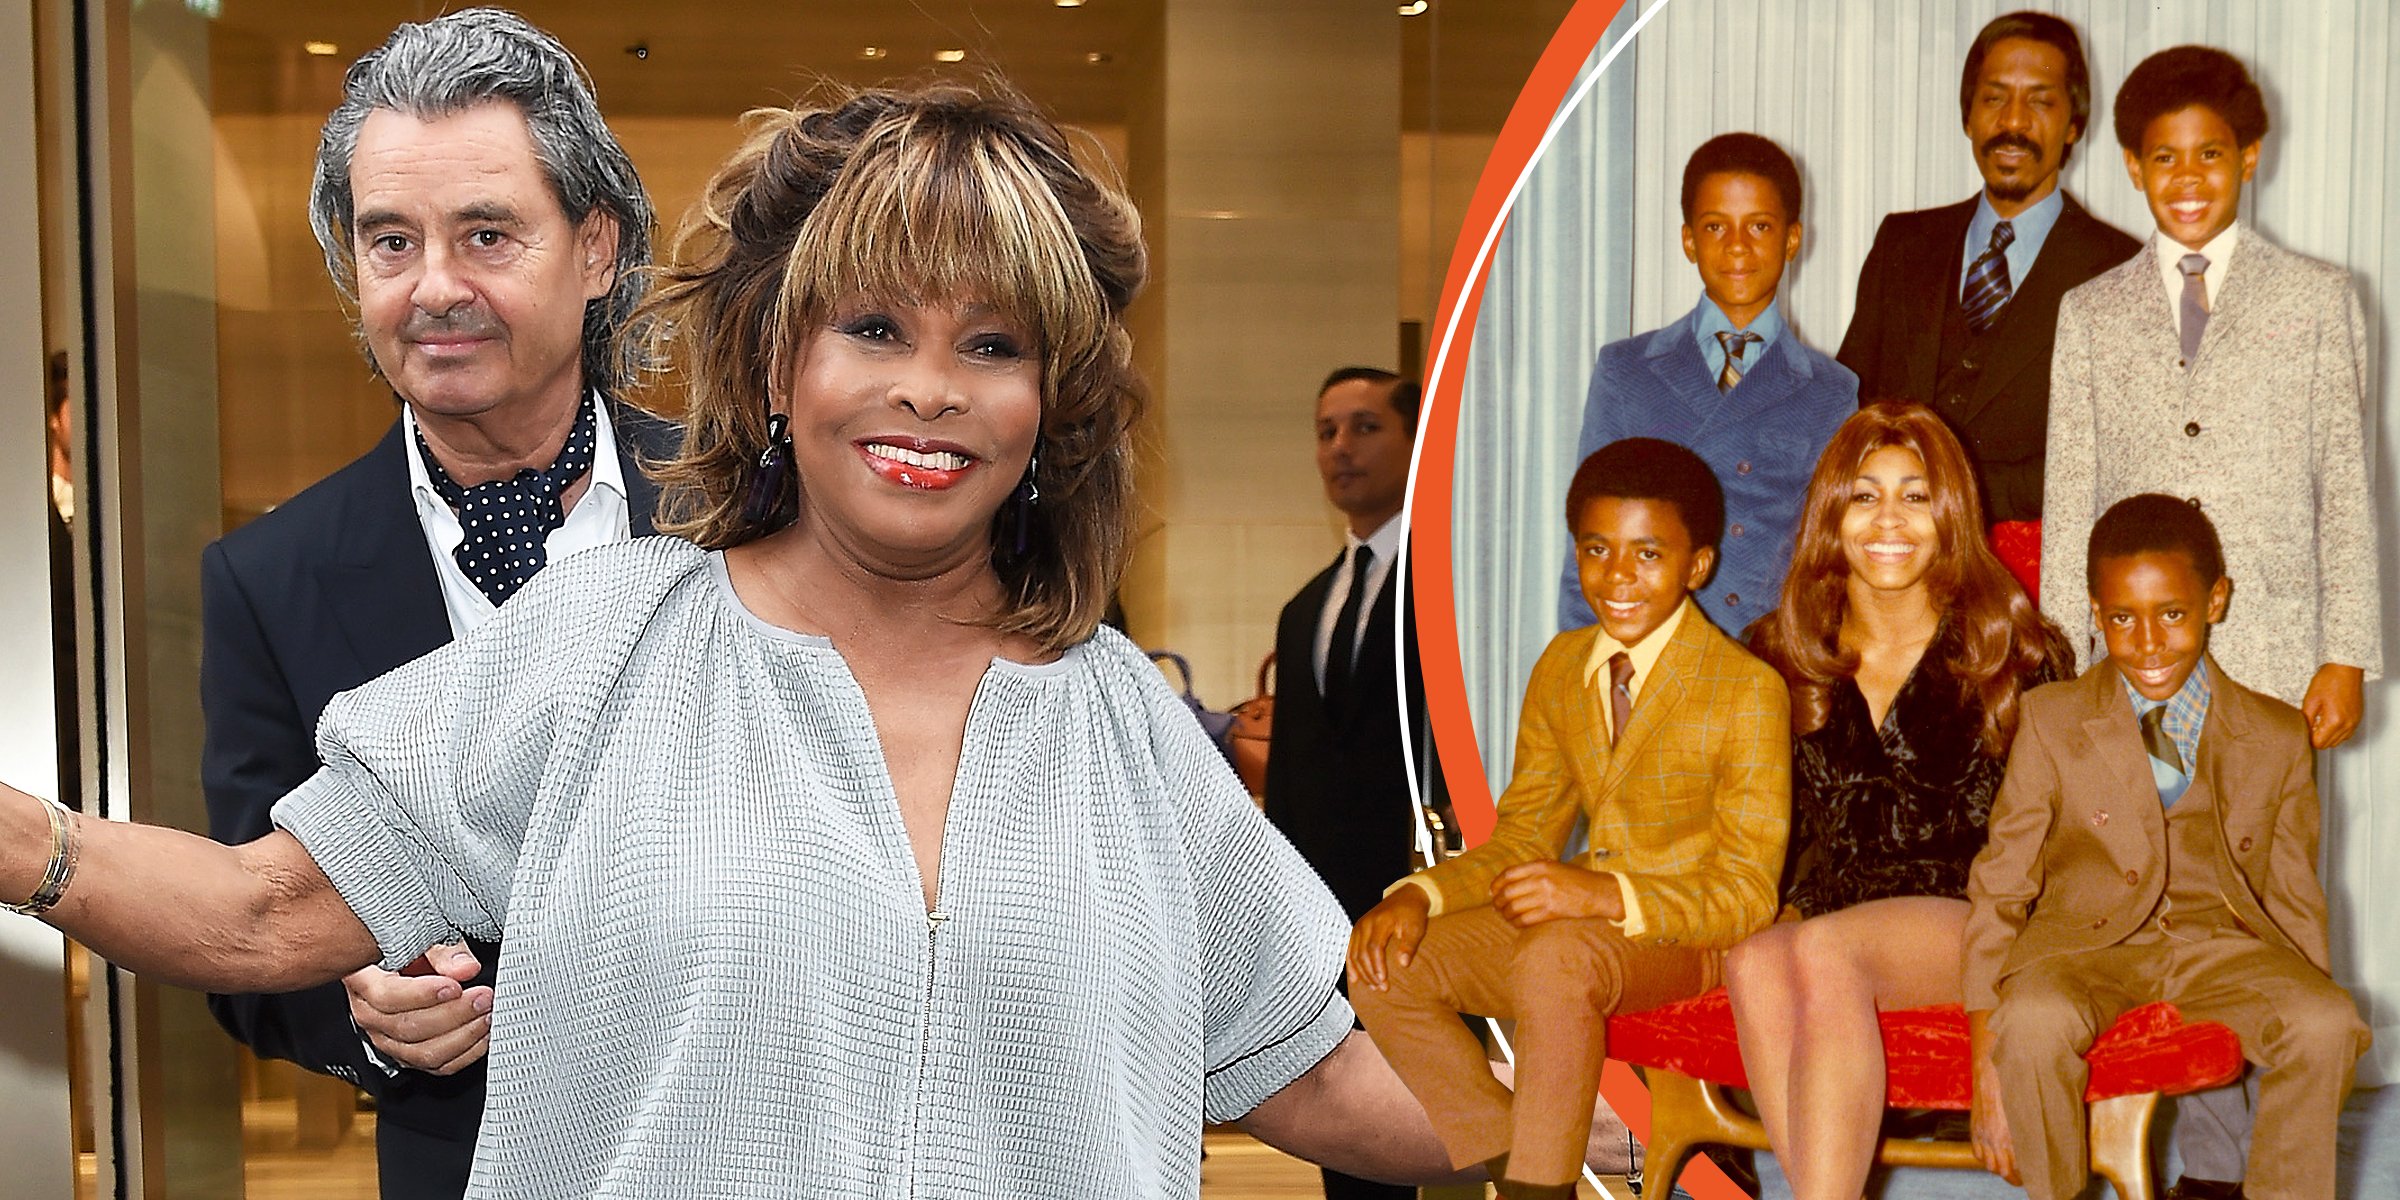 Tina Turner Mourns Death of Her 'Beloved Son' Ronnie in Heartbreaking Post